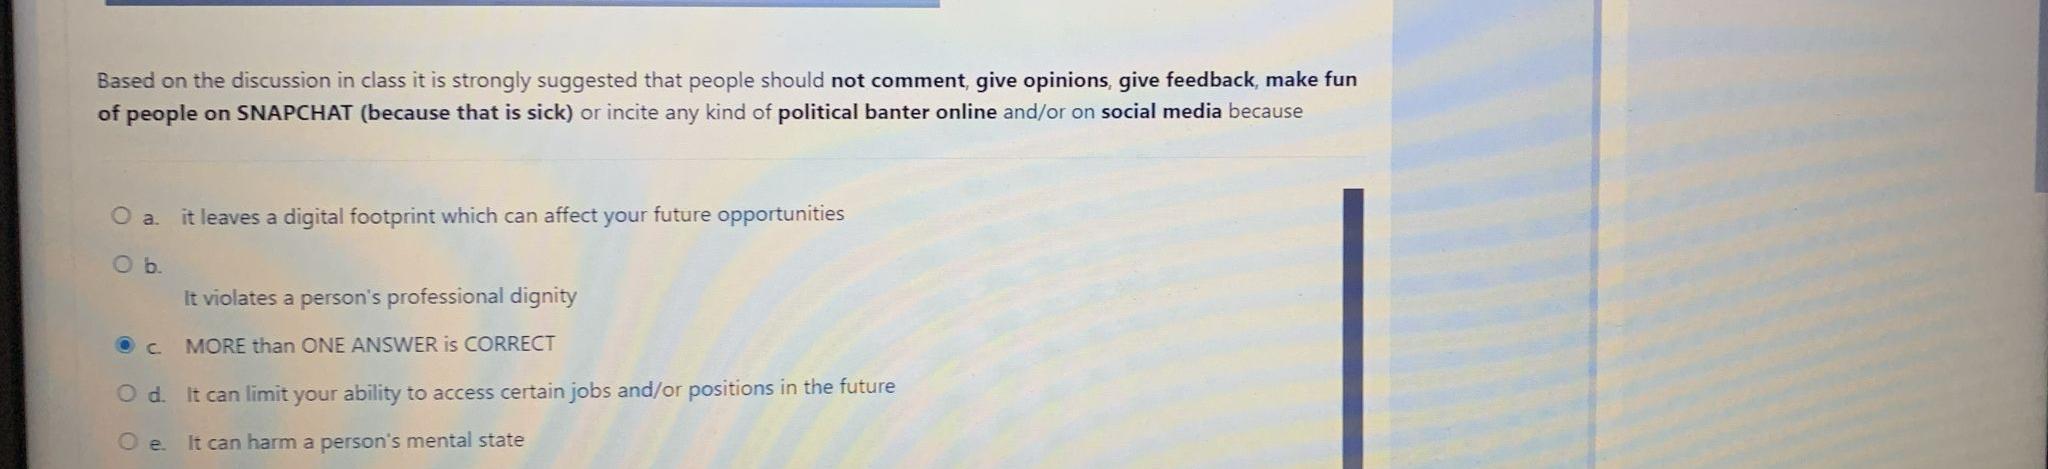 Based on the discussion in class it is strongly suggested that people should not comment, give opinions, give